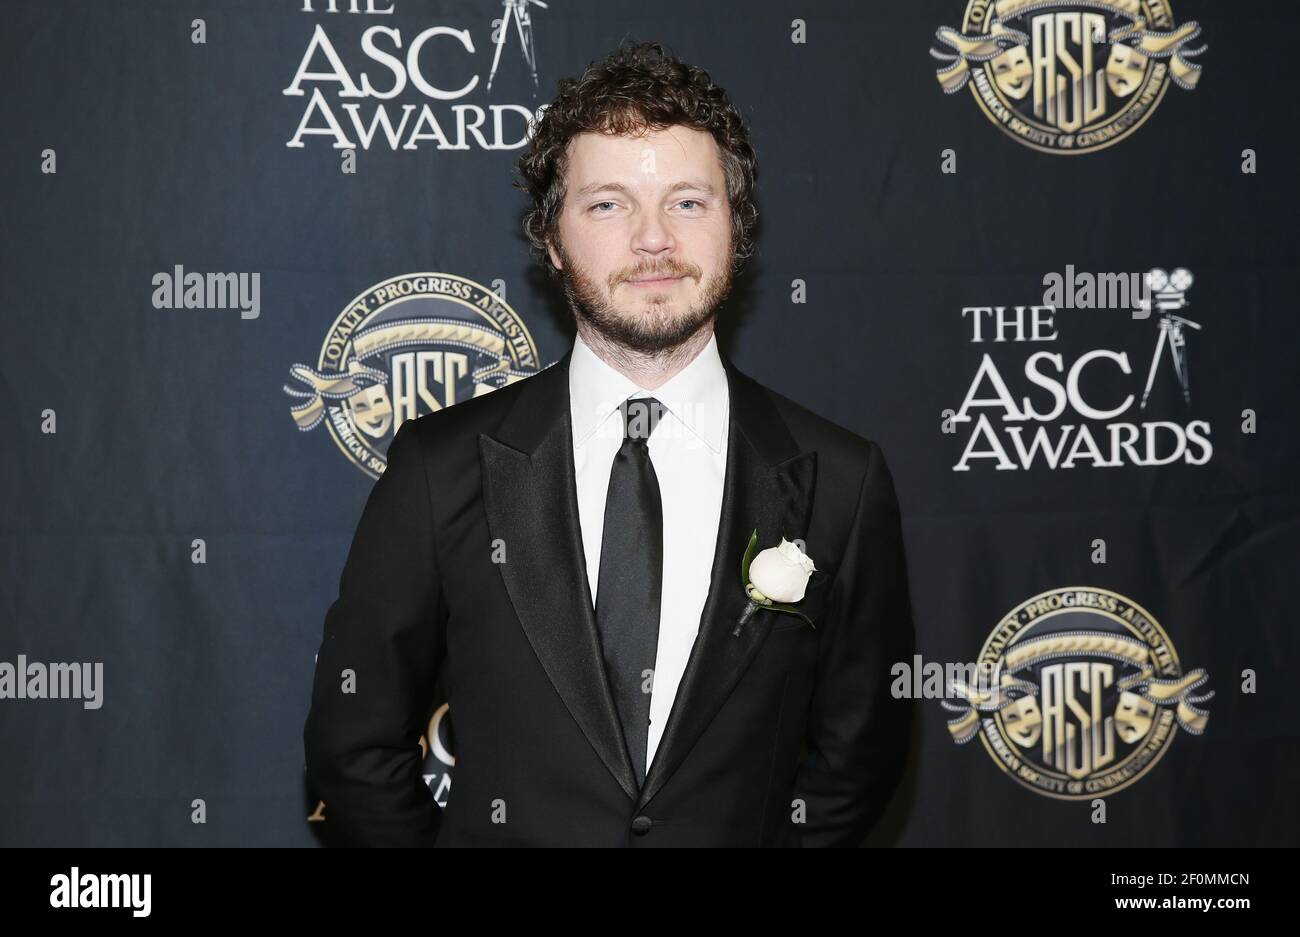 Nominee British cinematographer Ben Richardson poses at the 33rd annual ASC Awards and The American Society of Cinematographers 100th Anniversary Celebration at the Ray Dolby Ballroom at Hollywood & Highland, Saturday, February 9, 2019 in Hollywood, California. (Photo by Danny Moloshok/imageSPACE / SIPA USA) Stock Photo